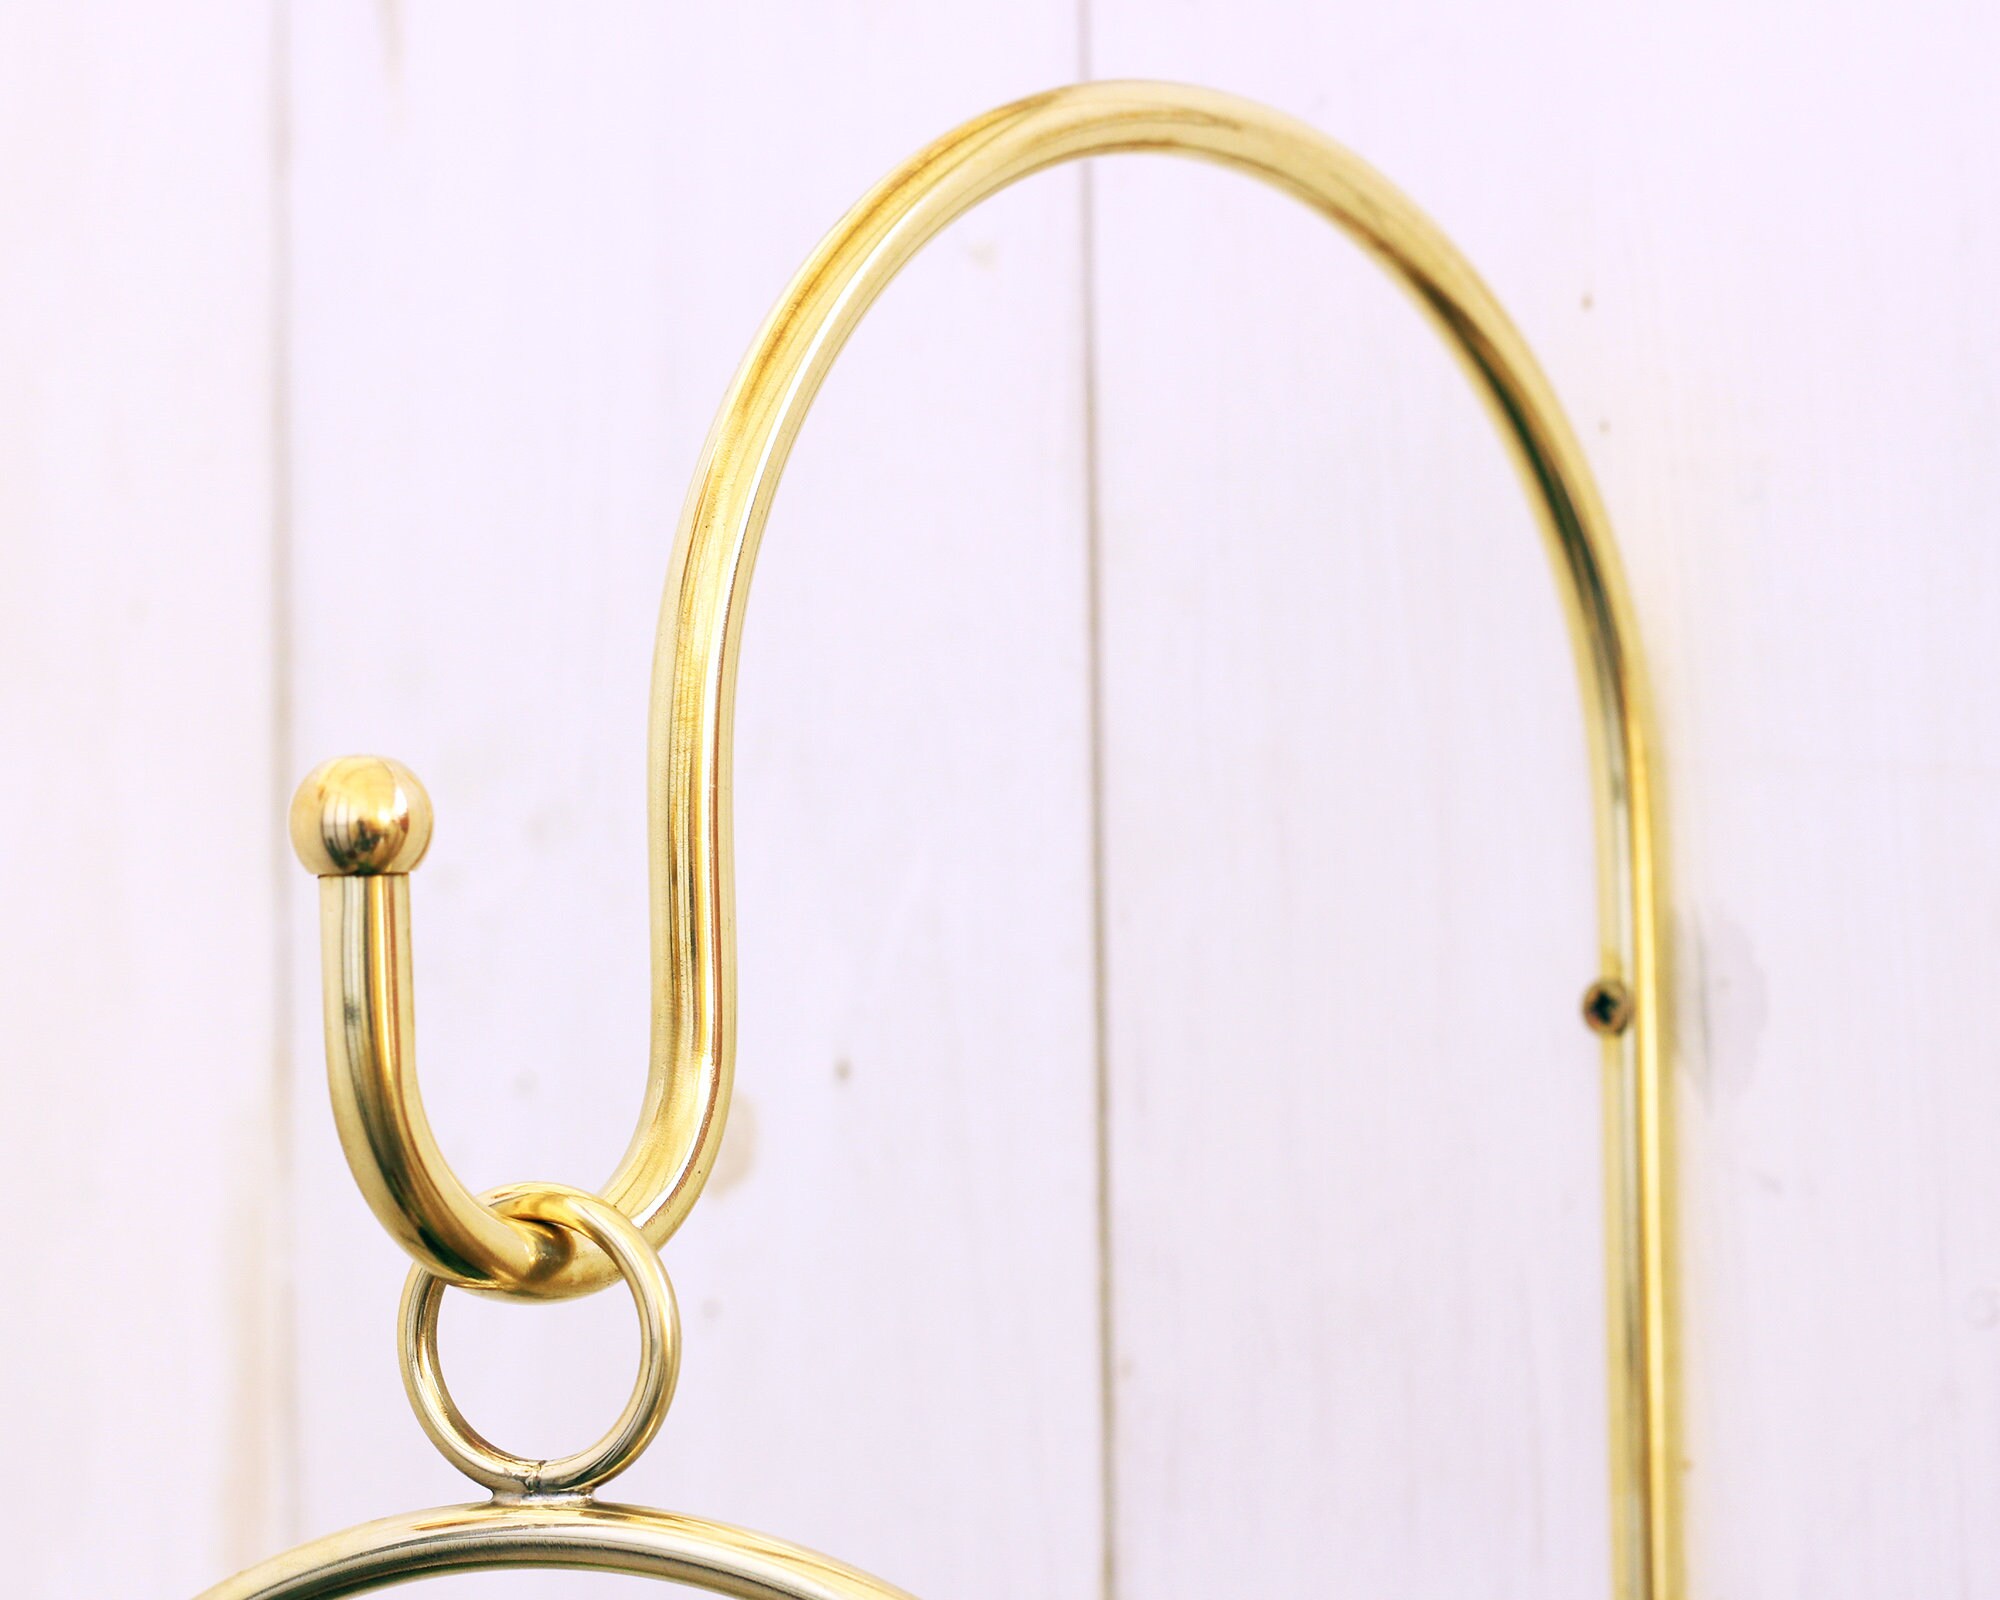 Wall Hook for Hanging Planter Indoor or Outdoor. Solid Brass and